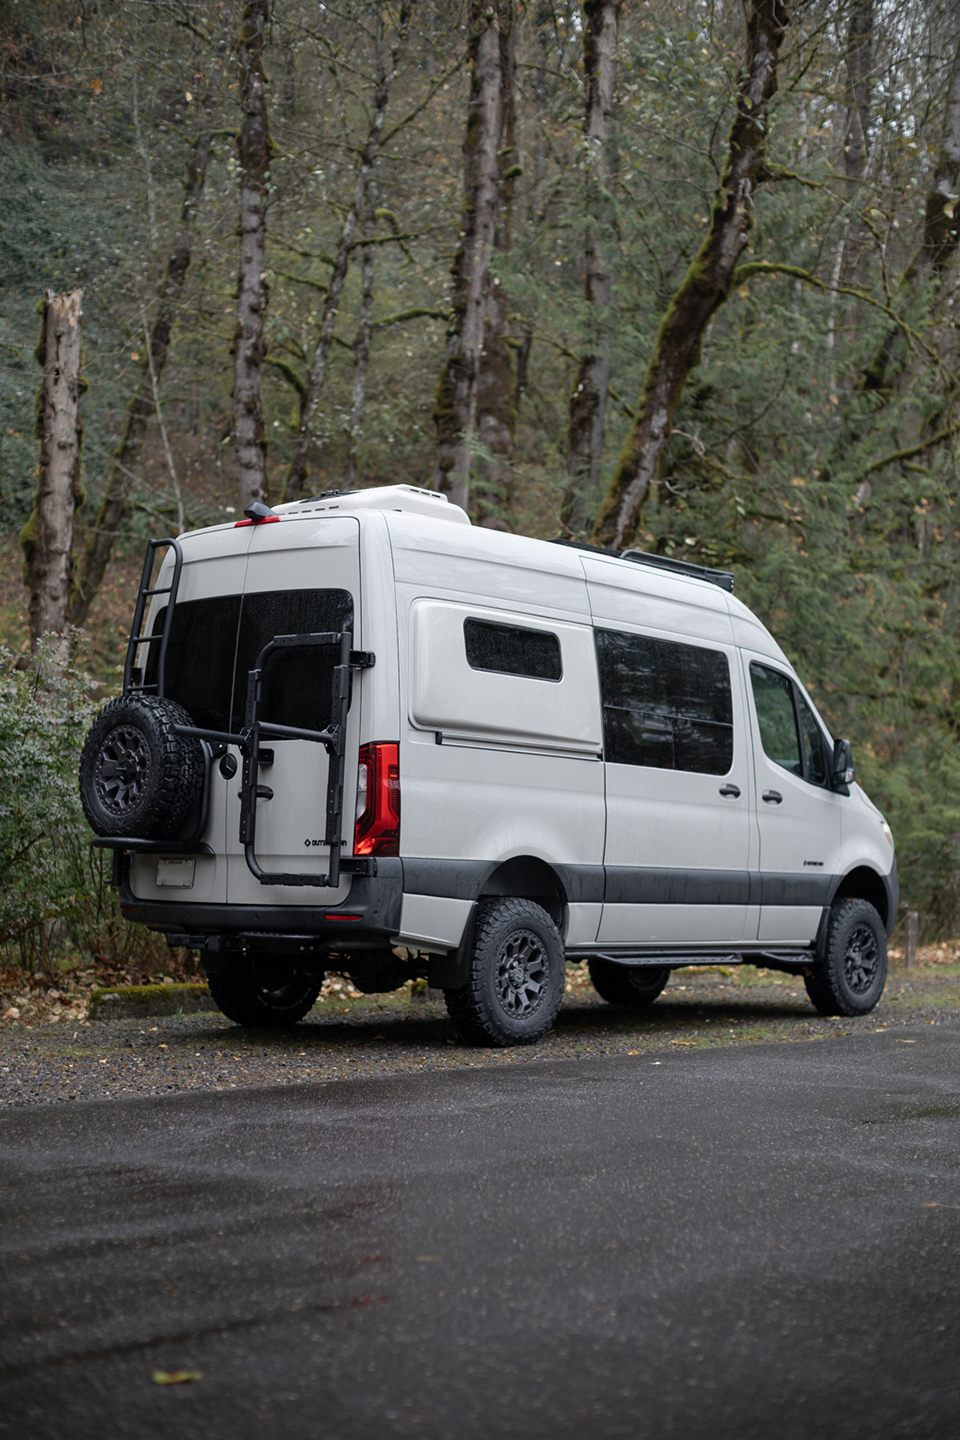 White van with rear ladder and spare tire carrier parked in a forest